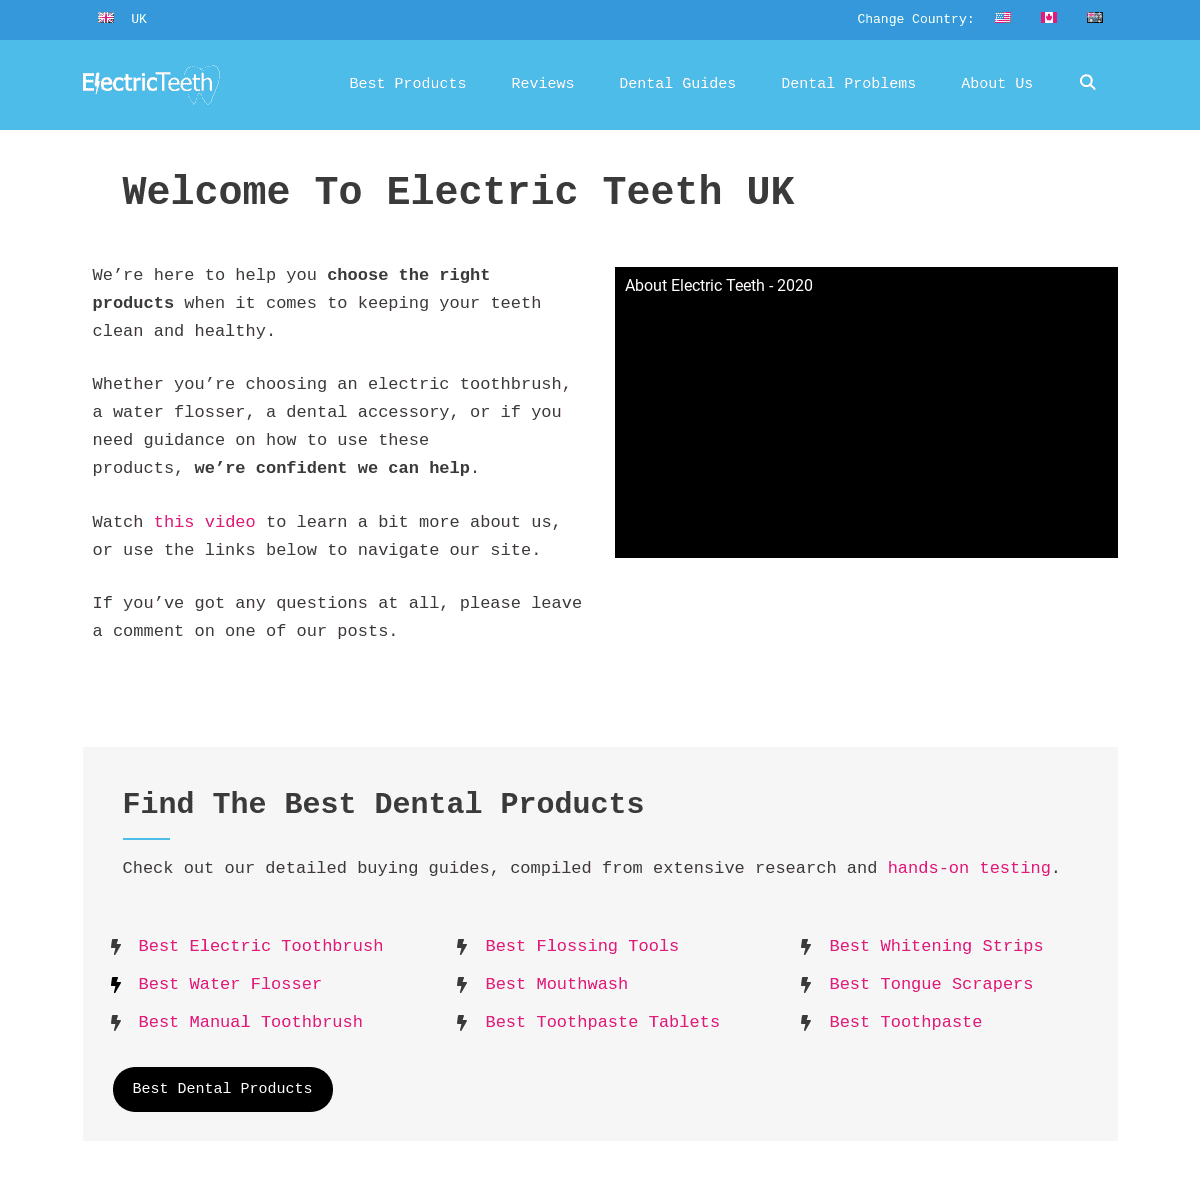 A complete backup of https://electricteeth.co.uk